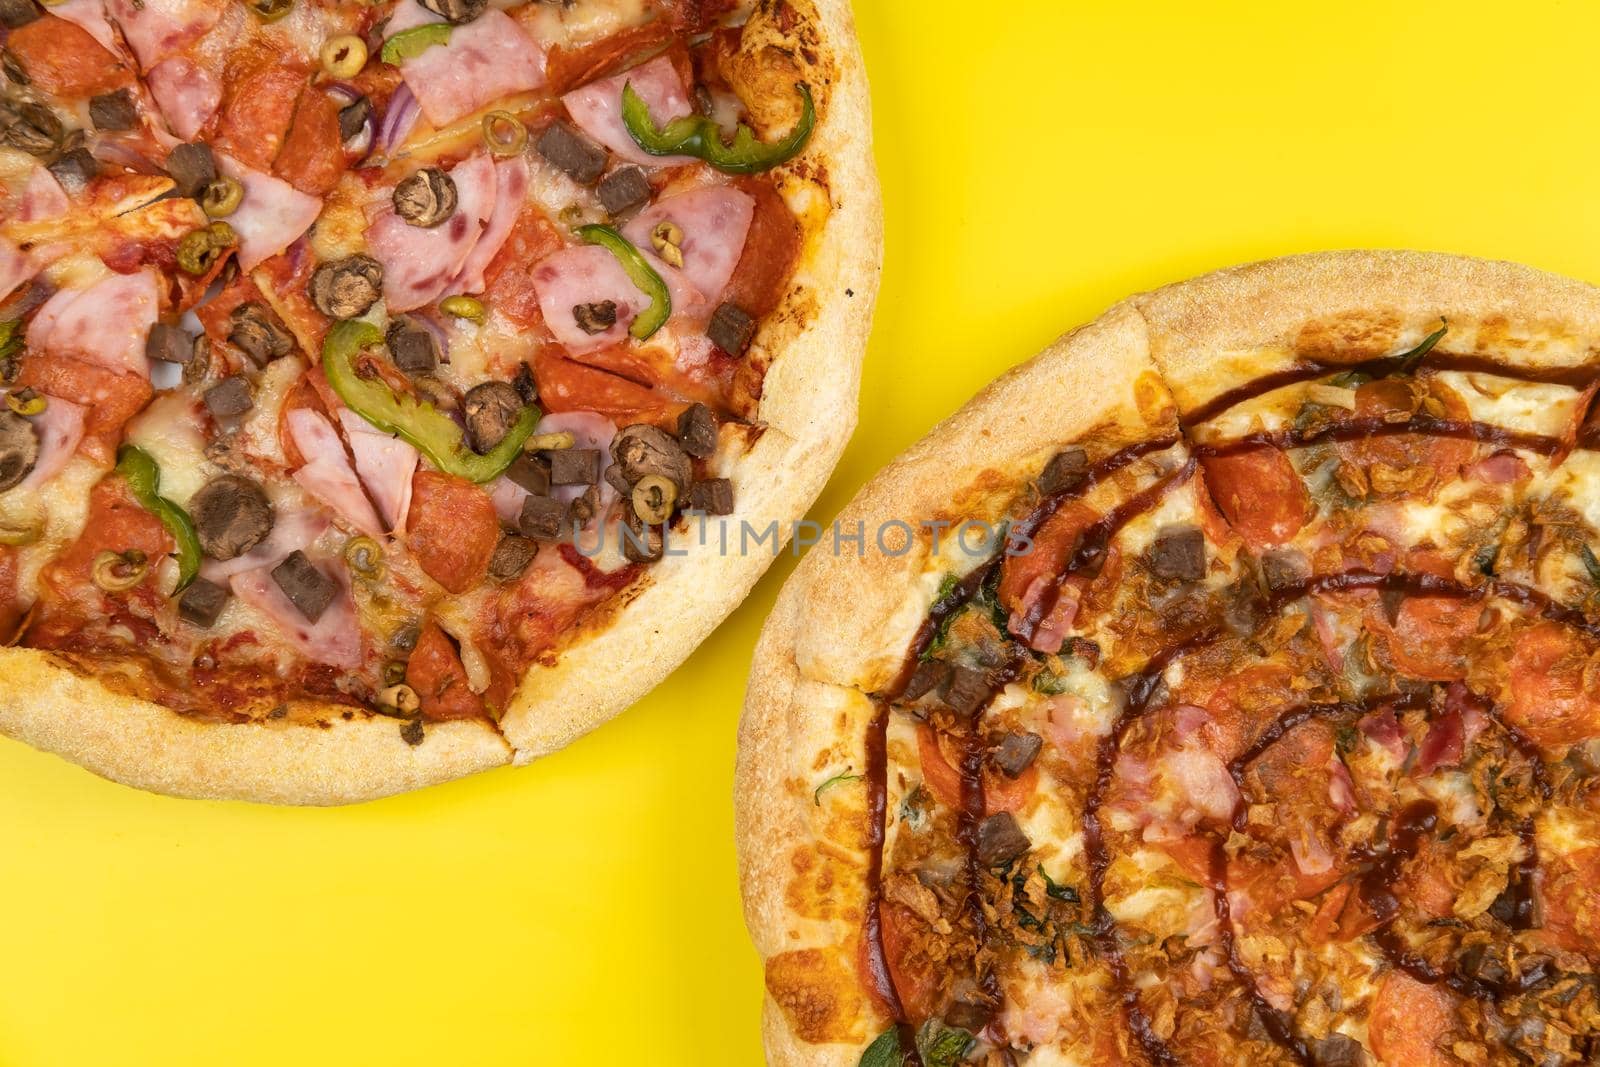 Two different Delicious big pizzas on a yellow background by Lobachad